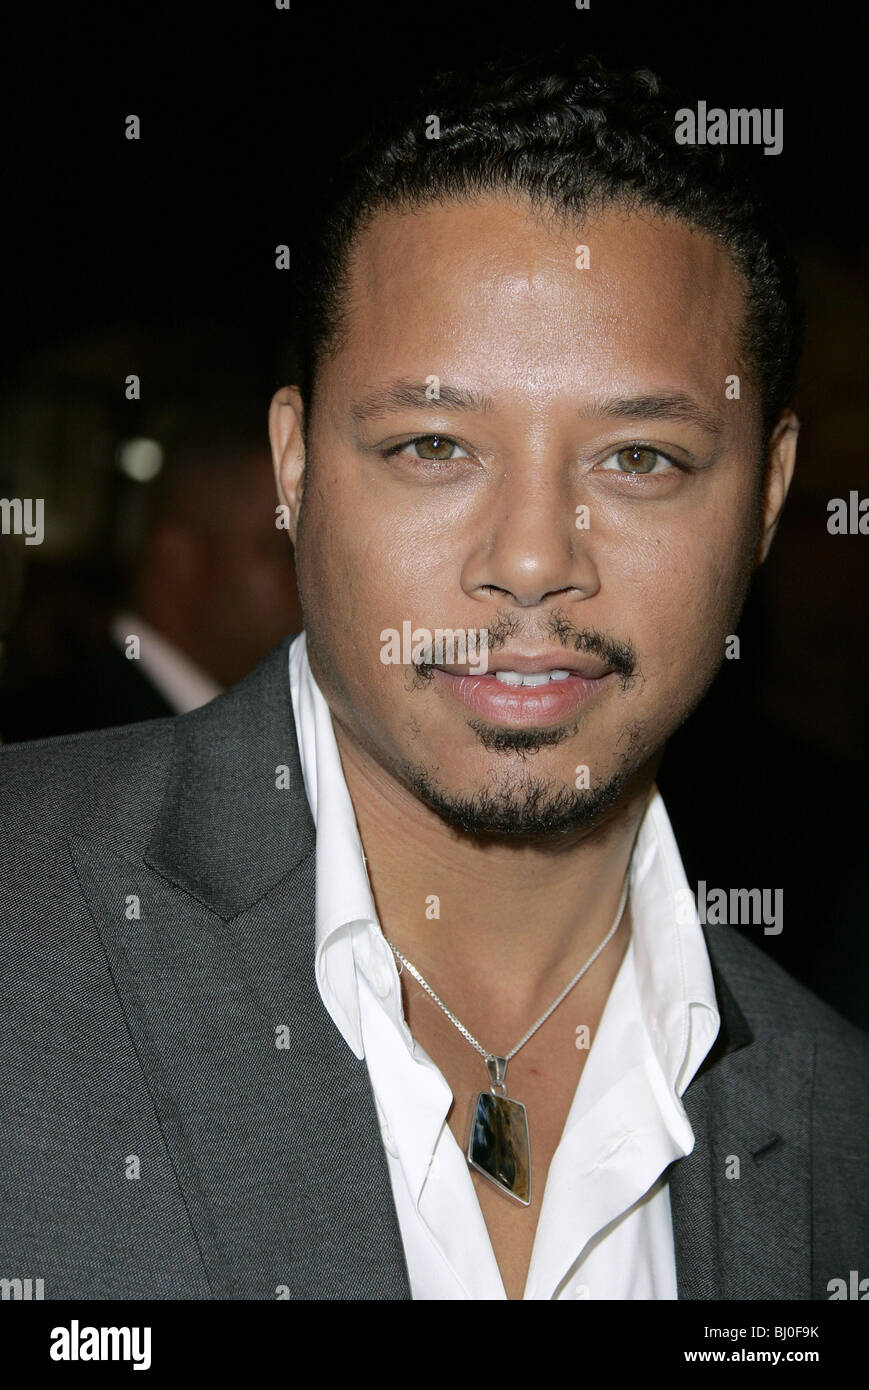 TERRENCE HOWARD ACTOR CHINESE THEATRE HOLLYWOOD LOS ANGELES USA 02